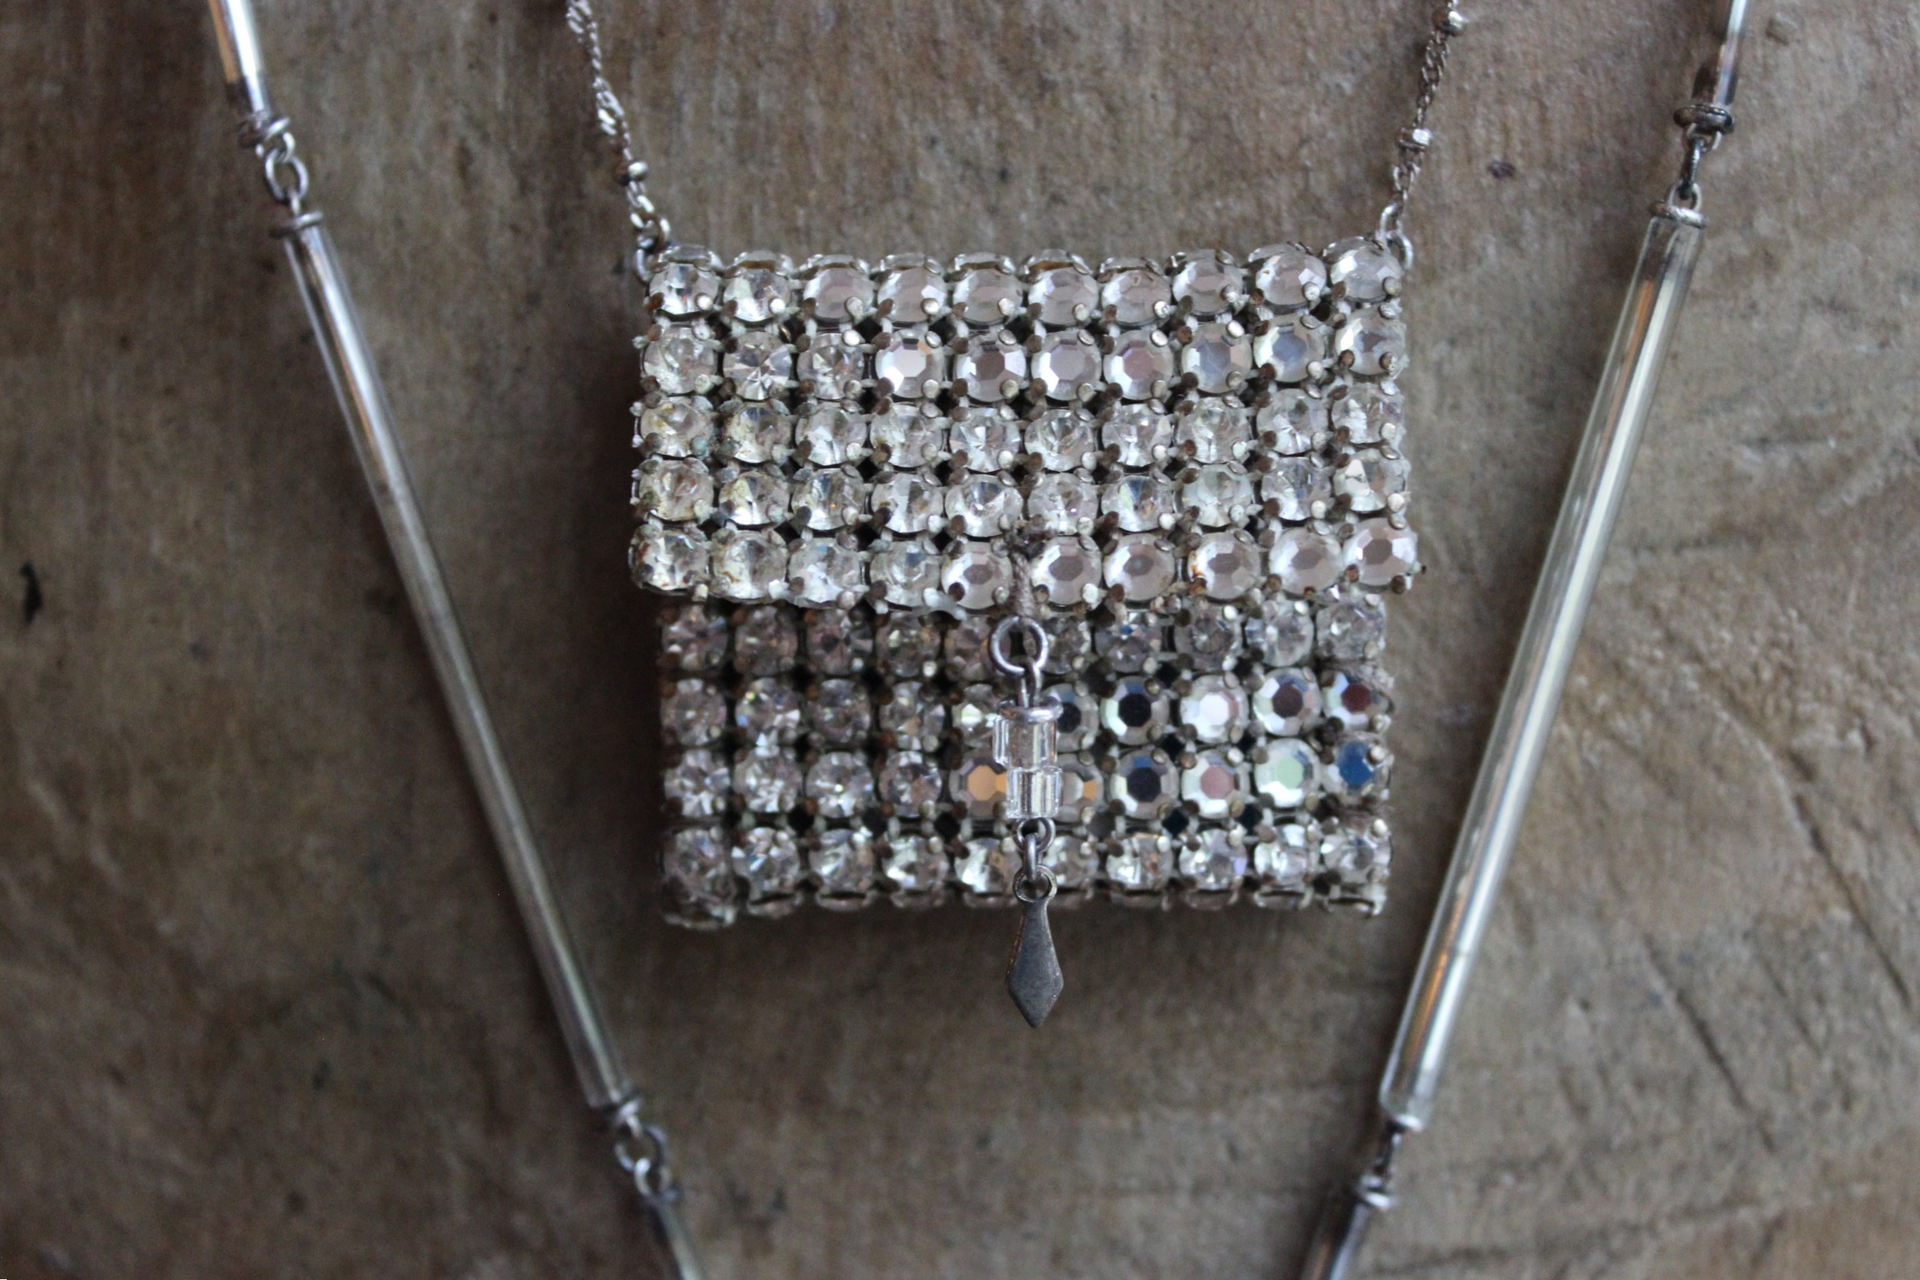 NEW! Antique Faceted Rhinestone Pouch Pendant and Faceted Rock Quartz Necklace Set with Antique Foil Lined Bugle Bead Chain,Sterling Bead Point Chain